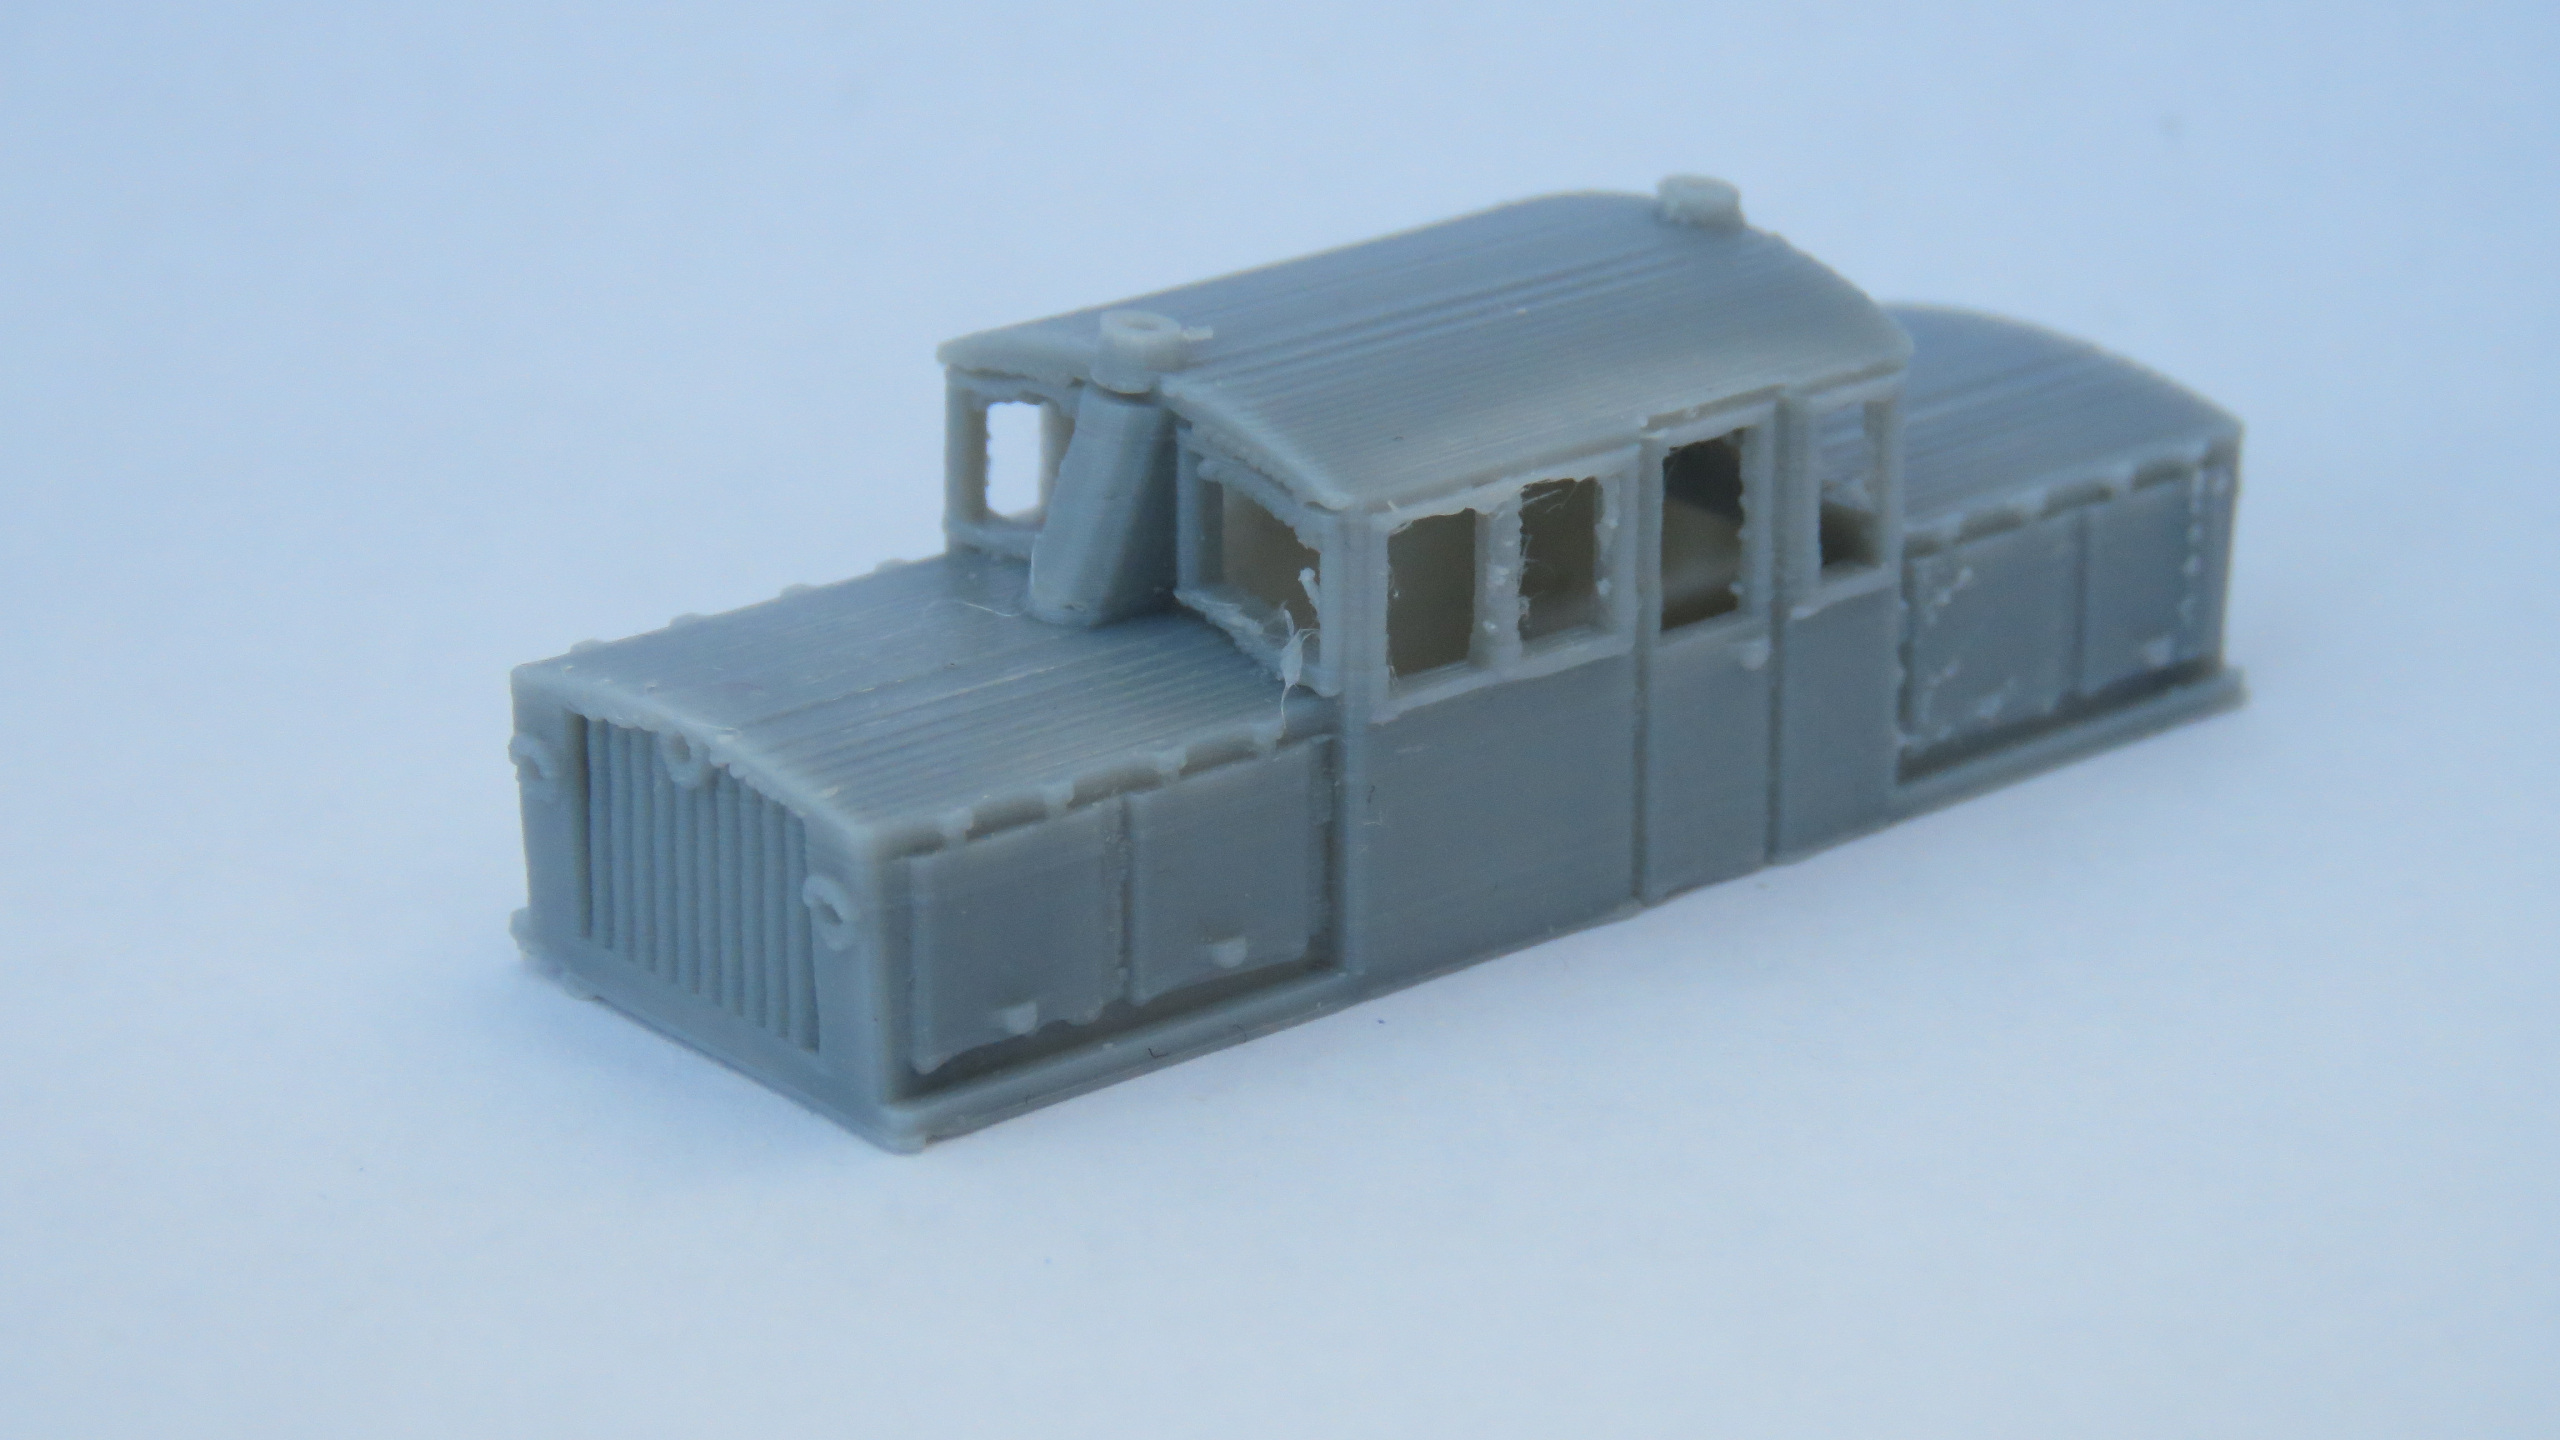 09 scale HUNSLET DIESEL LOCO Kit 09/03  15” GAUGE  For the Kato11-103 or 11-109 